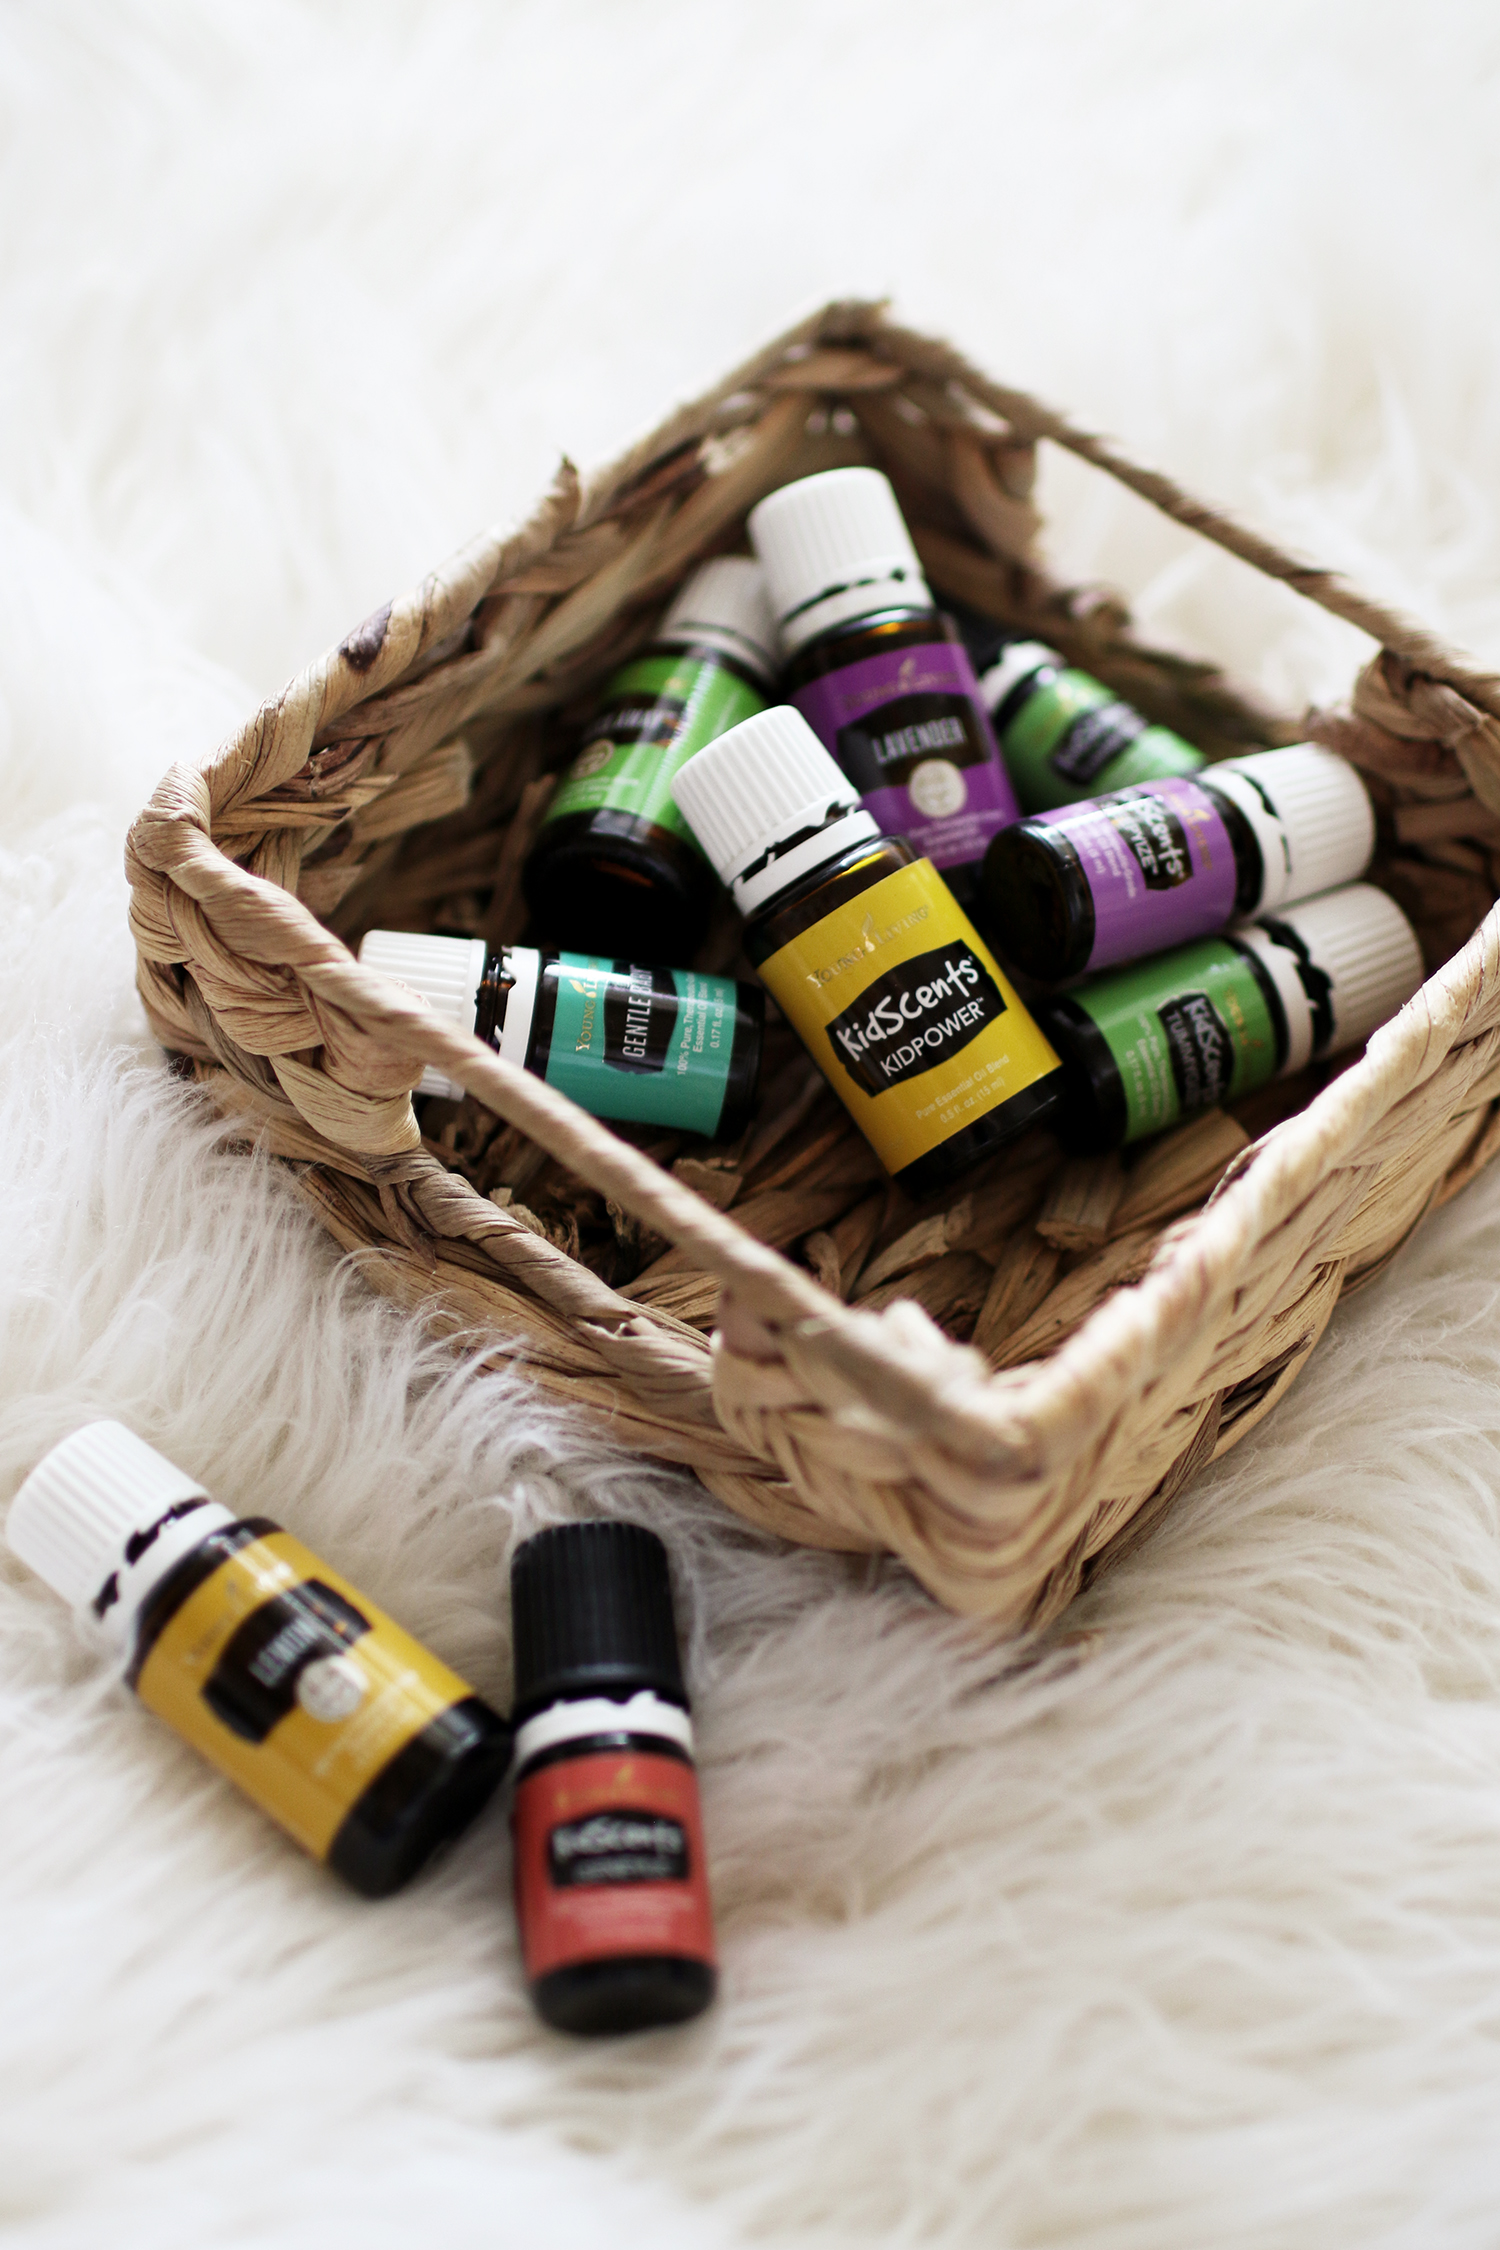 Essential Oils & Kids: What We love in our home and how we are using them. From better sleep to support with feelings of anxiousness and overwhelm. Catch it all on KaraLayne.com!